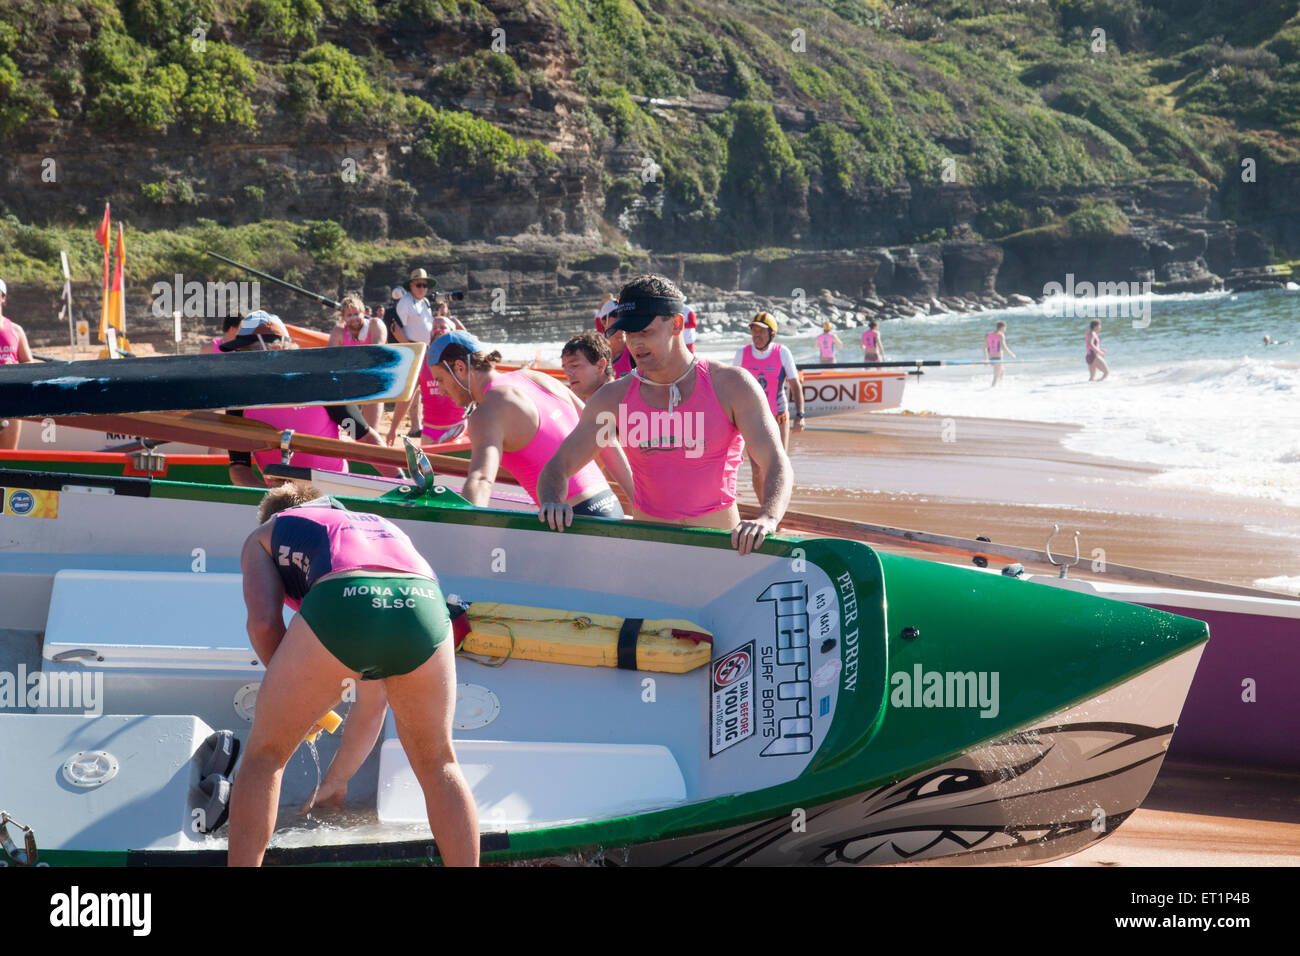 Summer surfboat racing competition amongst surfclubs located on Sydney's northern beaches begins at Bilgola Beach. Cluns competi Stock Photo